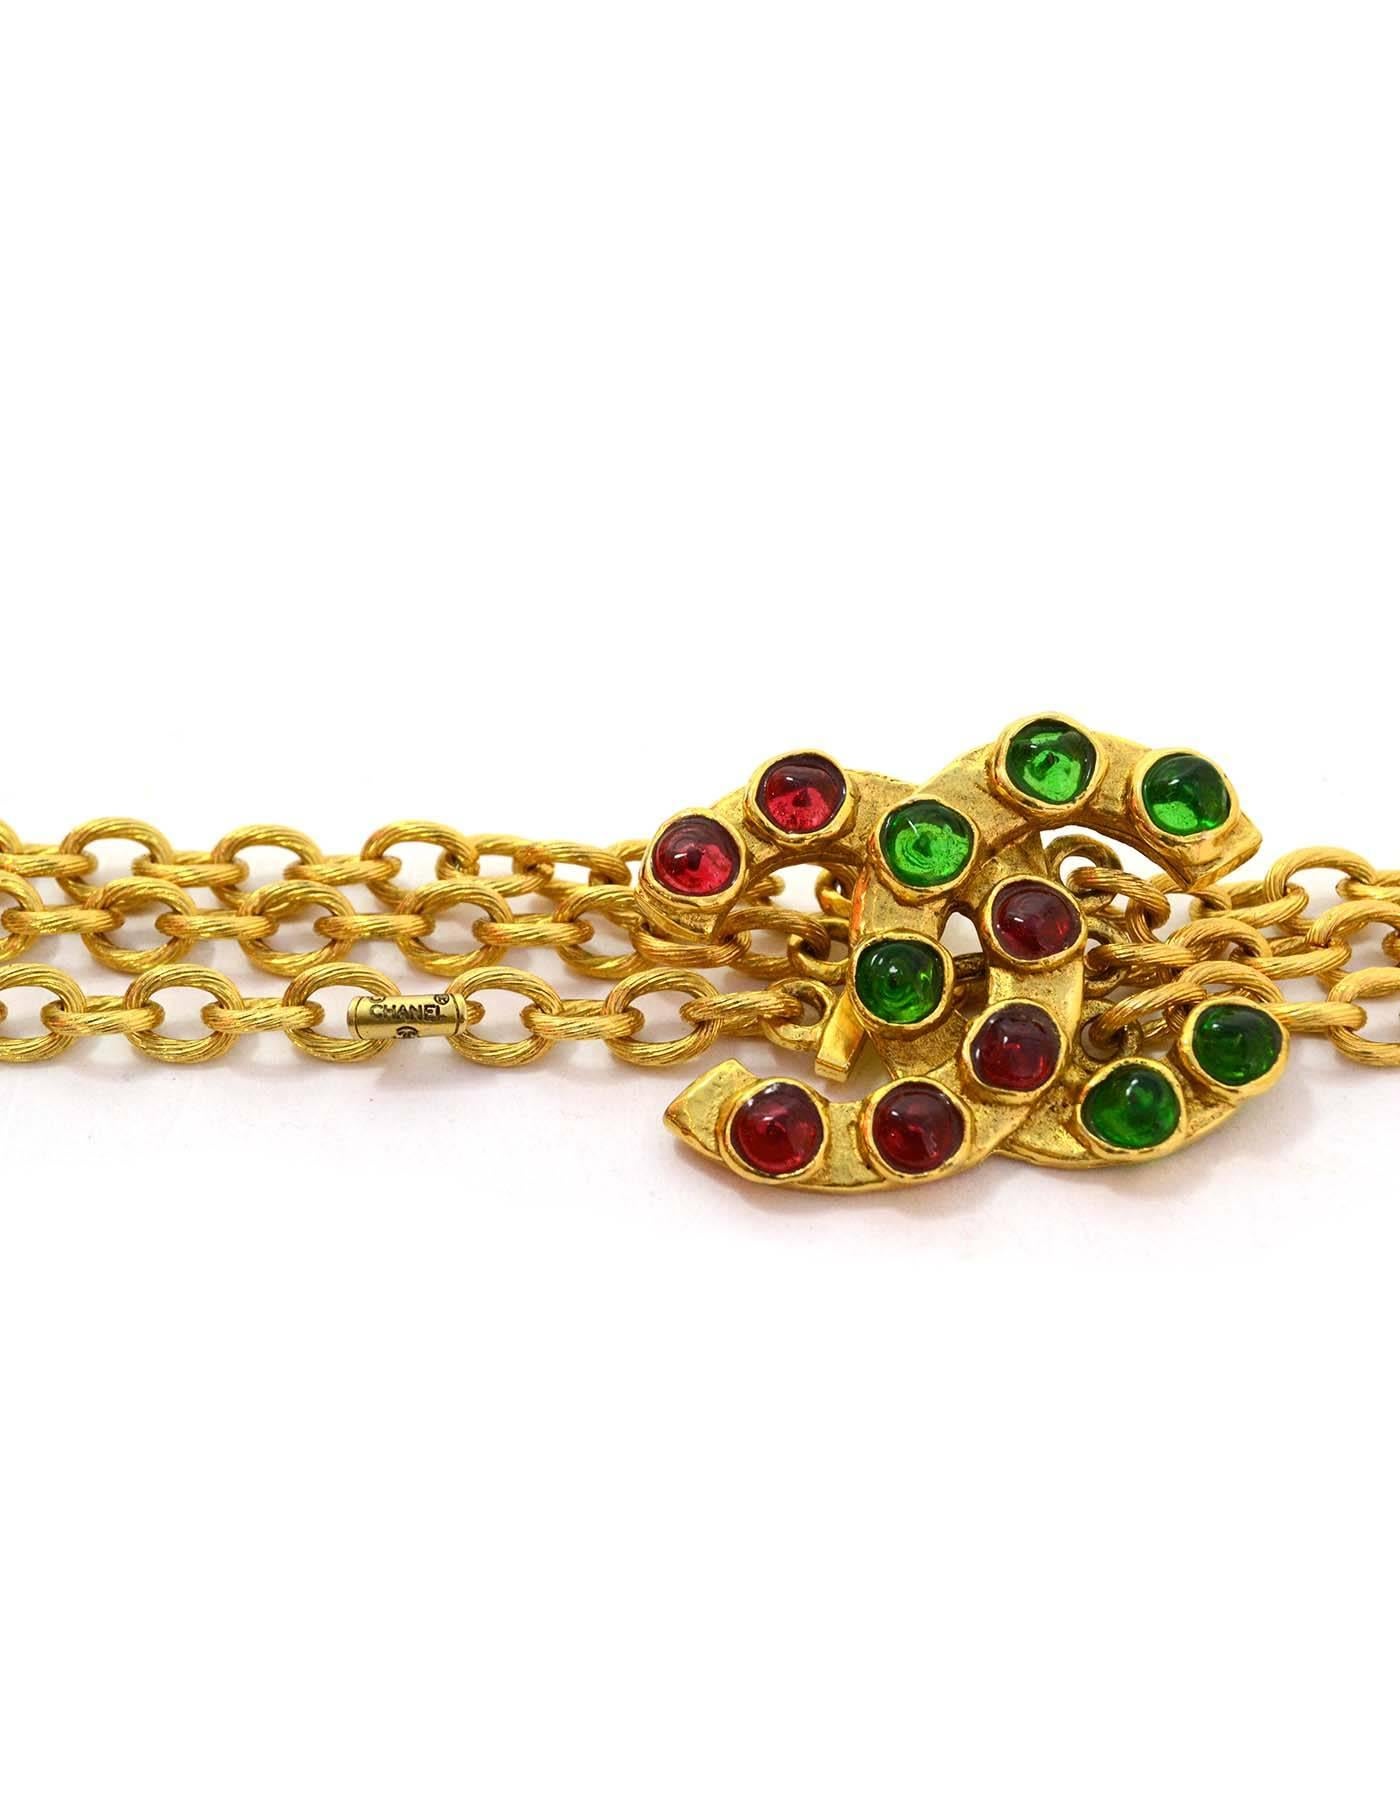 Brown Chanel Vintage Three Strand Chain Link Belt/Necklace w/ Green & Red Gripoix CC